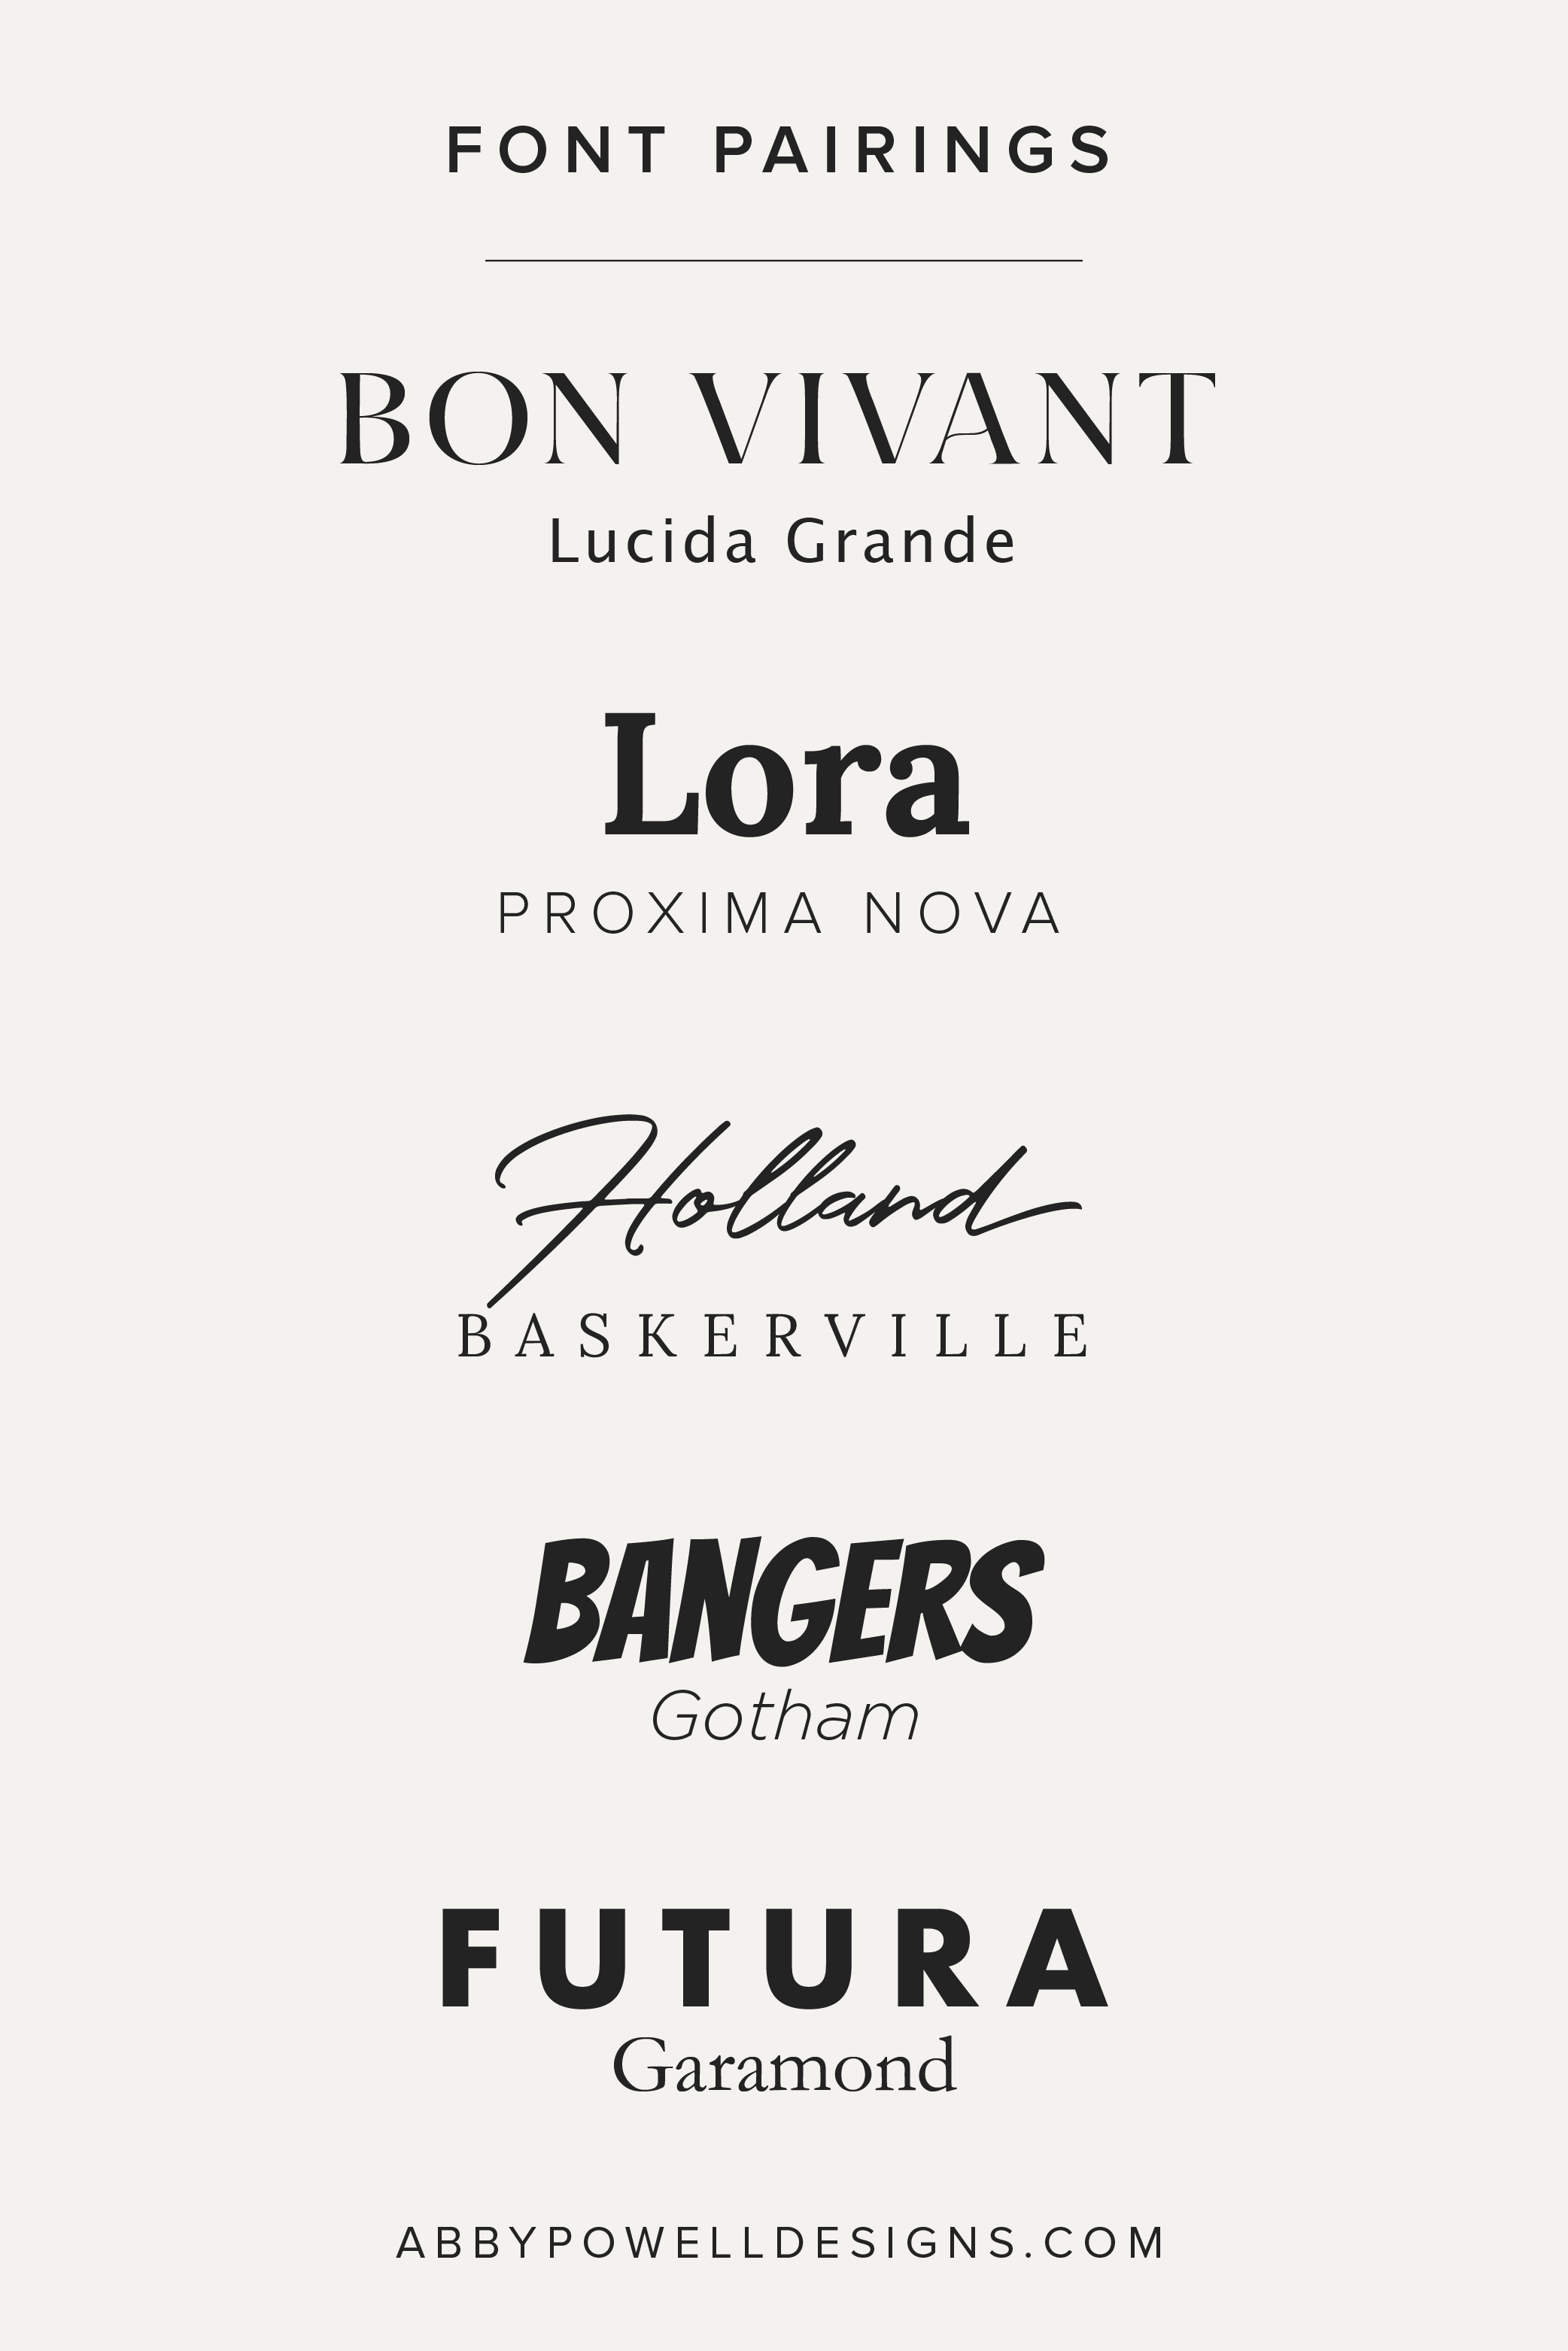 Font pairings for modern, bold, feminine, elegant, and playful by Abby Powell.